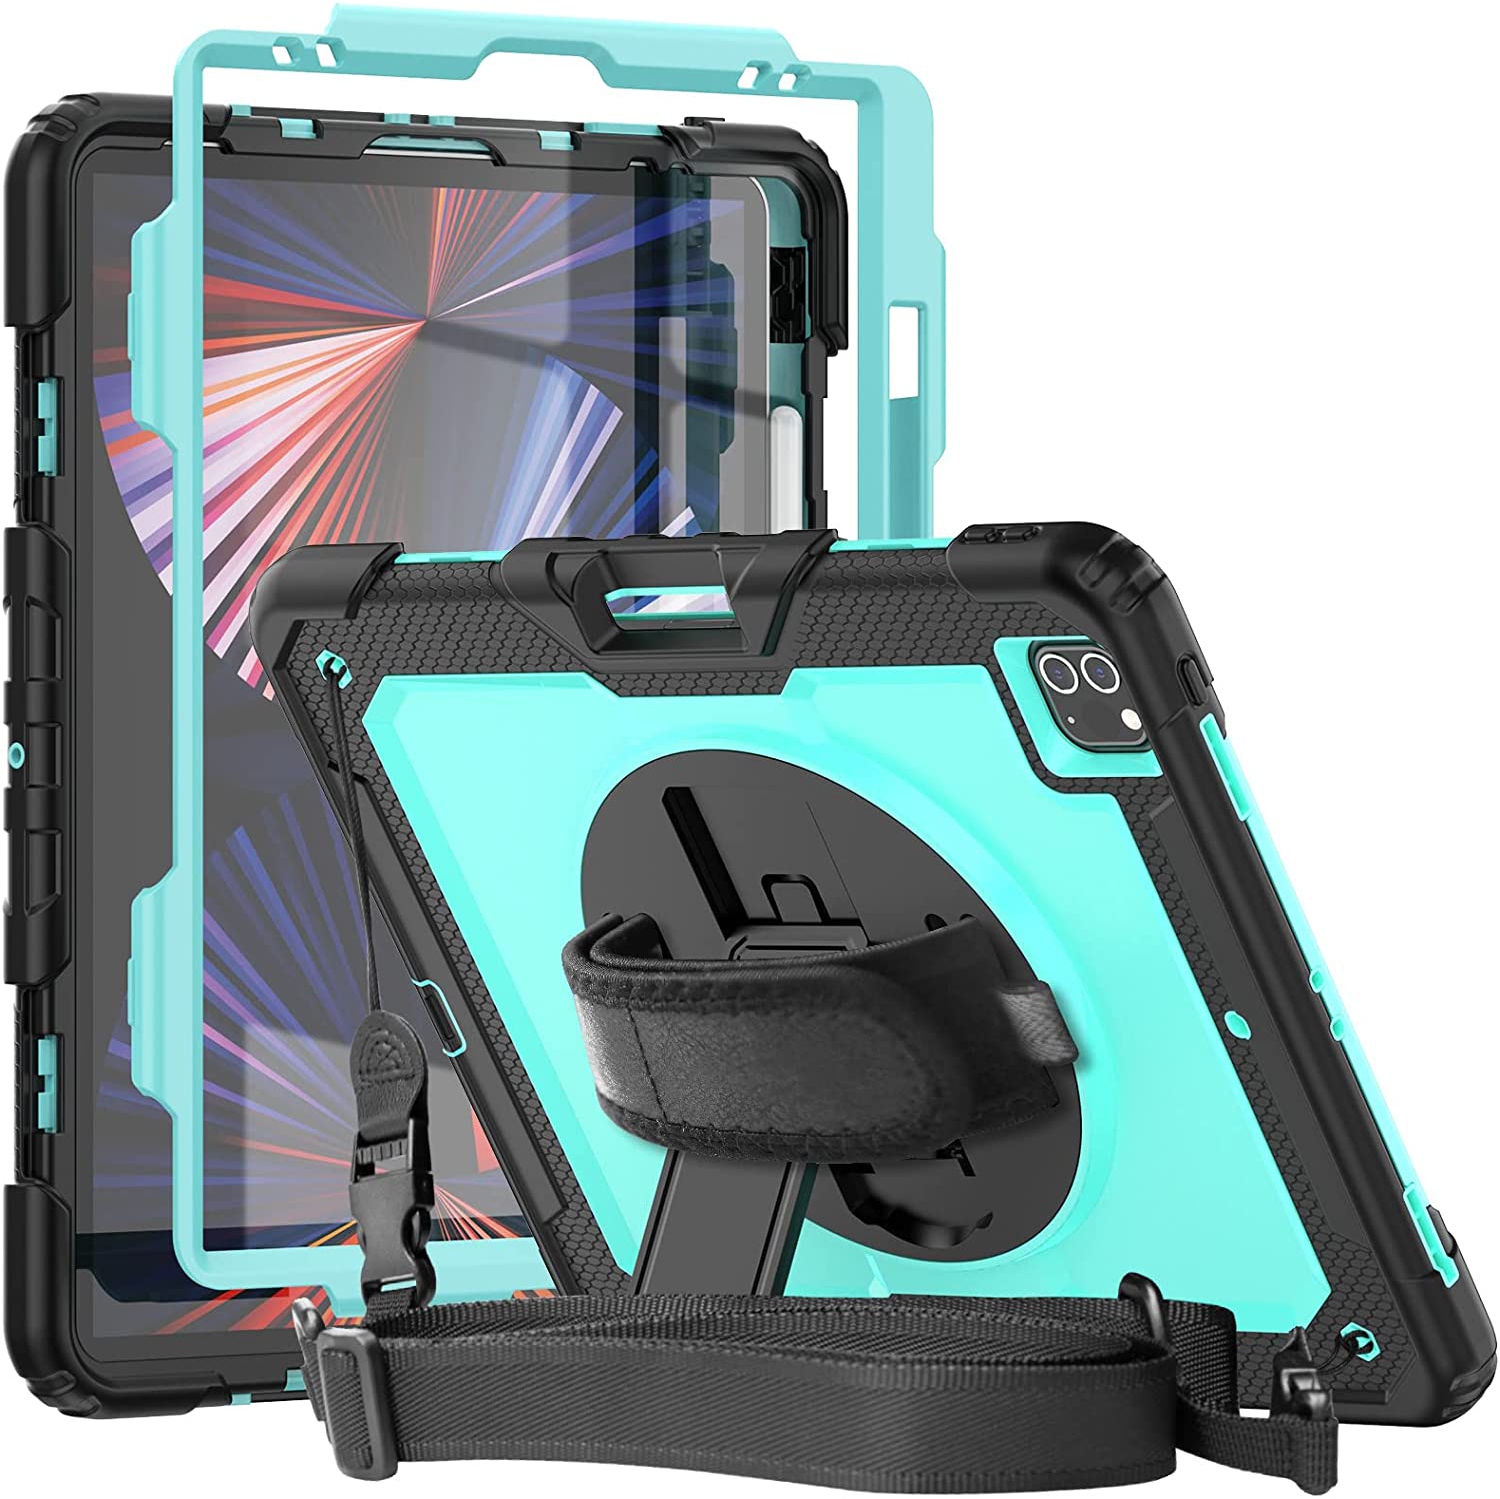 Case for iPad Pro 12.9 2020 with Screen Protector H iPad Pro 4th Generation 12.9 Inch Case with Pencil Holder 3 Layer Dropproof Heavy Duty Rugged Protective Cover with Shouler S